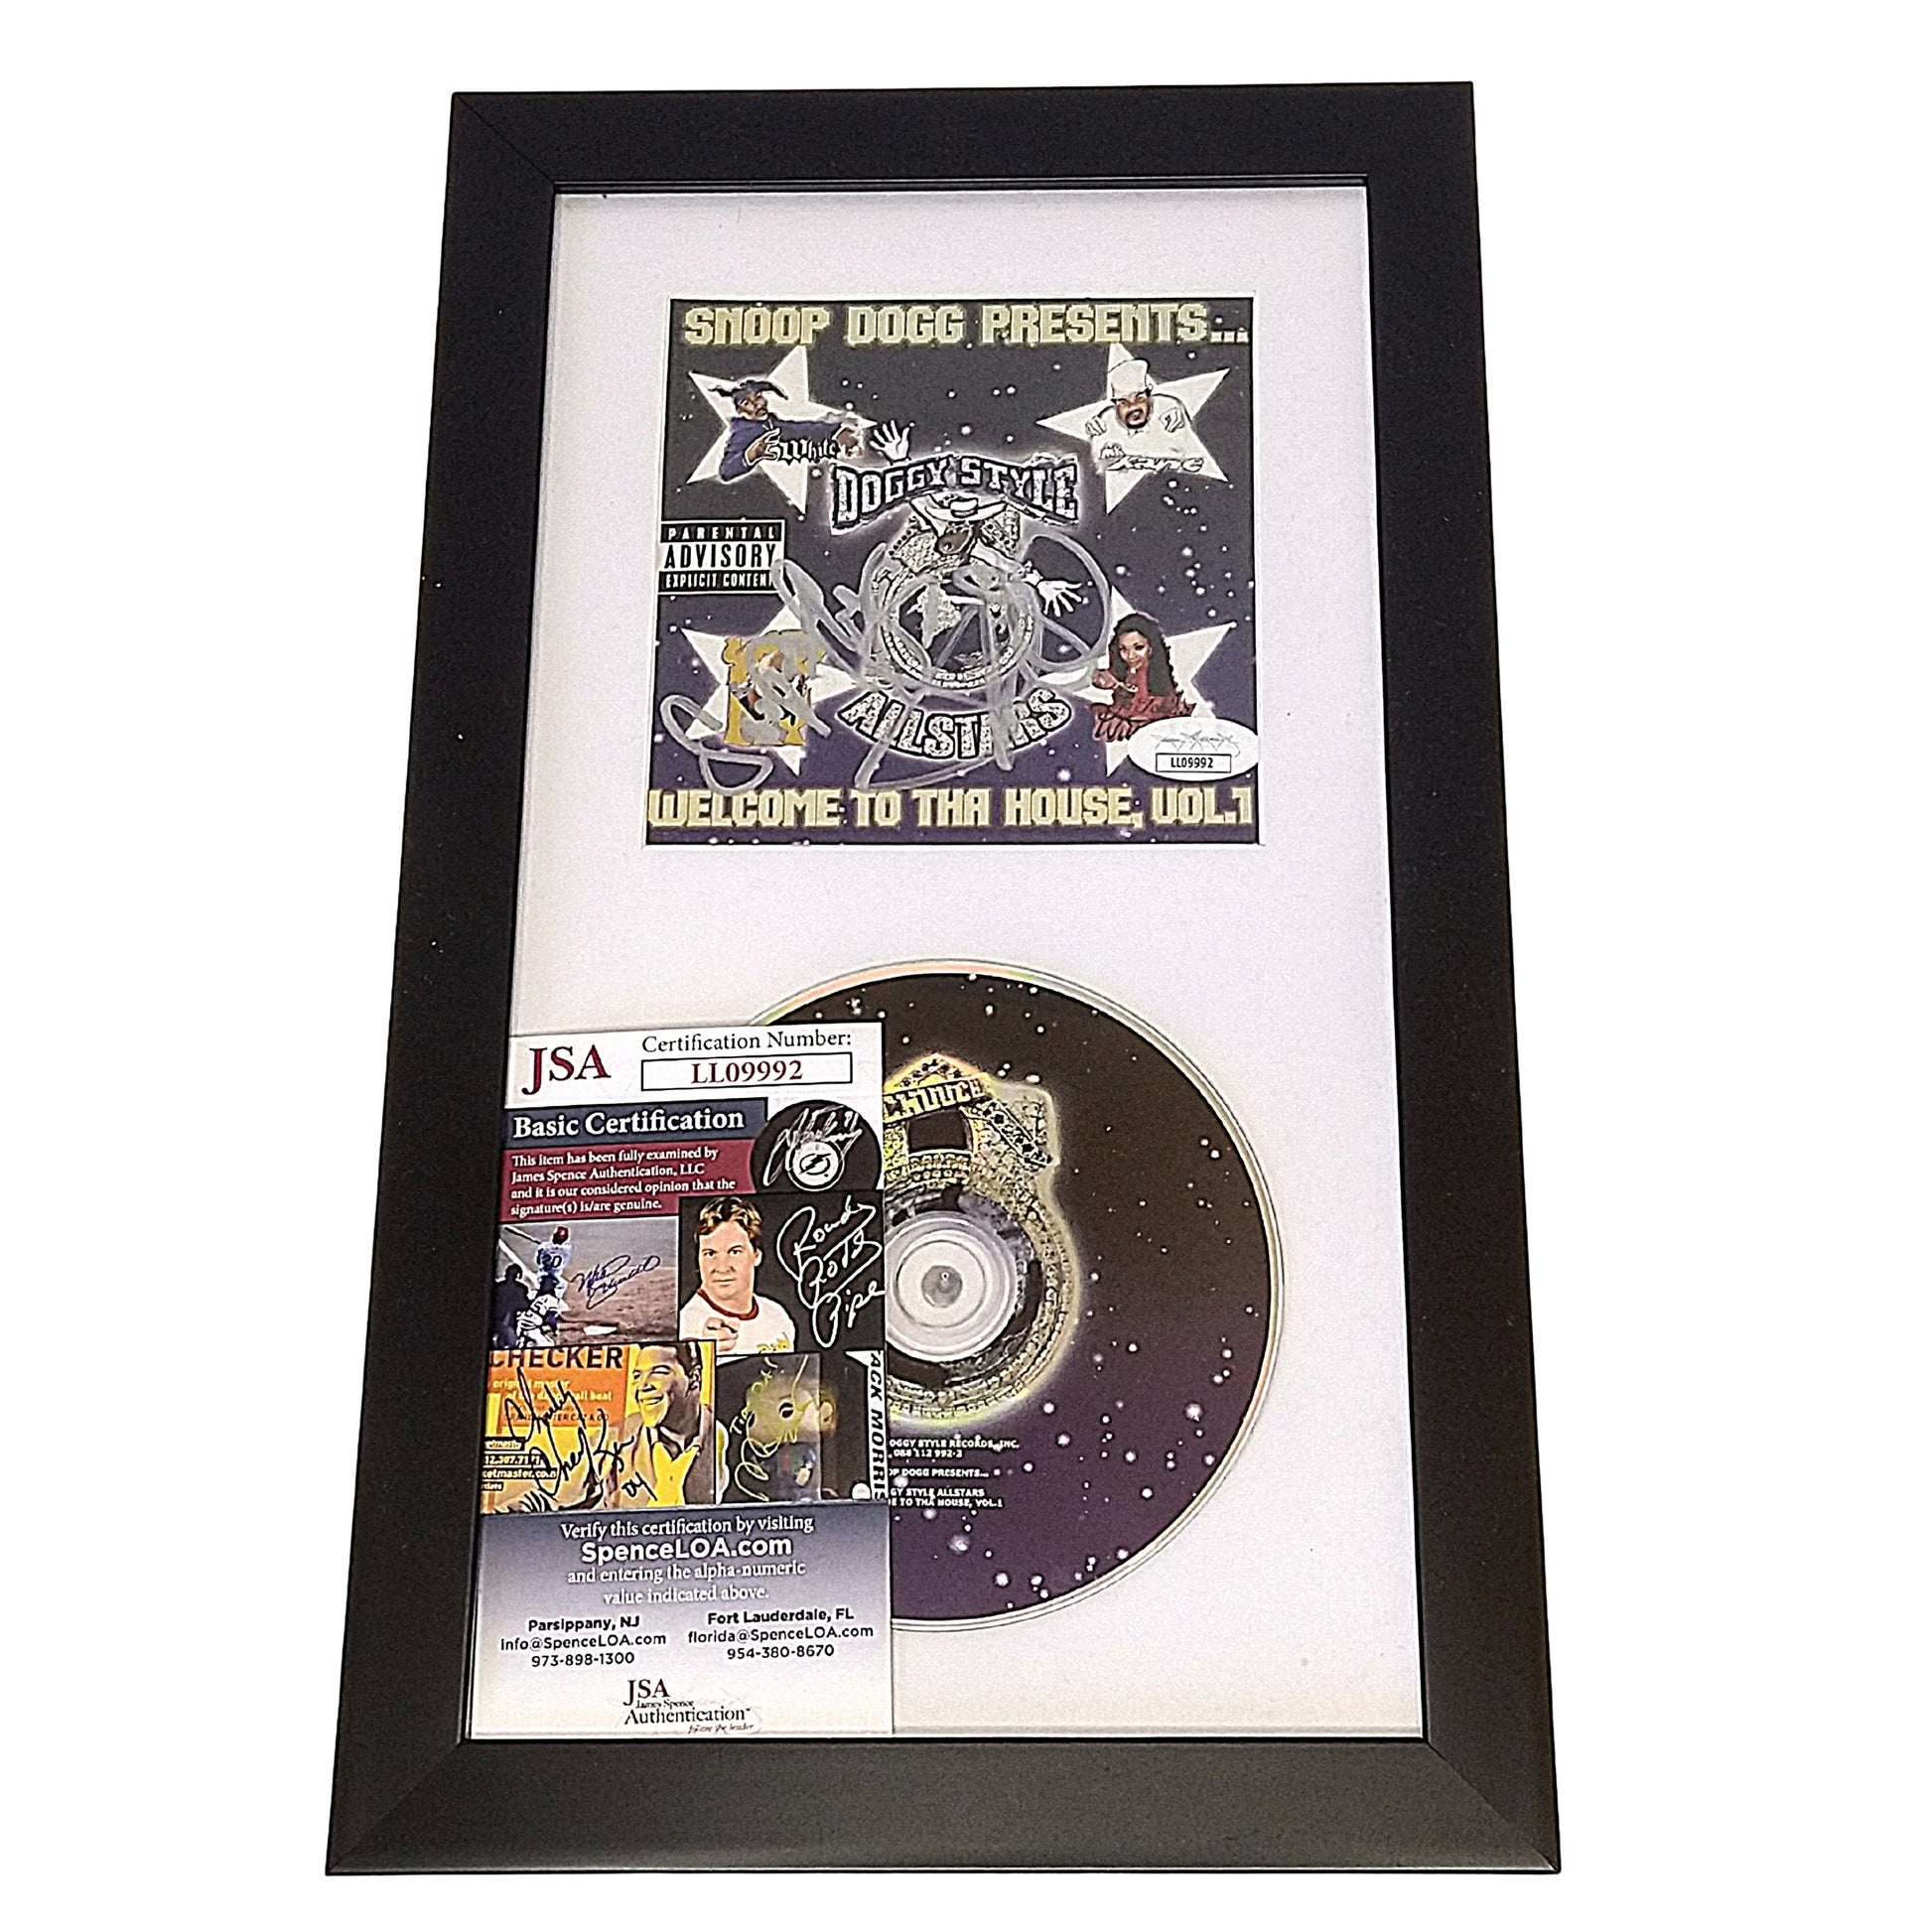 Music- Autographed- Snoop Dogg and Soopafly Signed Welcome To Da House Vol 1 Framed CD Cover and Compact Disc- JSA Authentication - 103